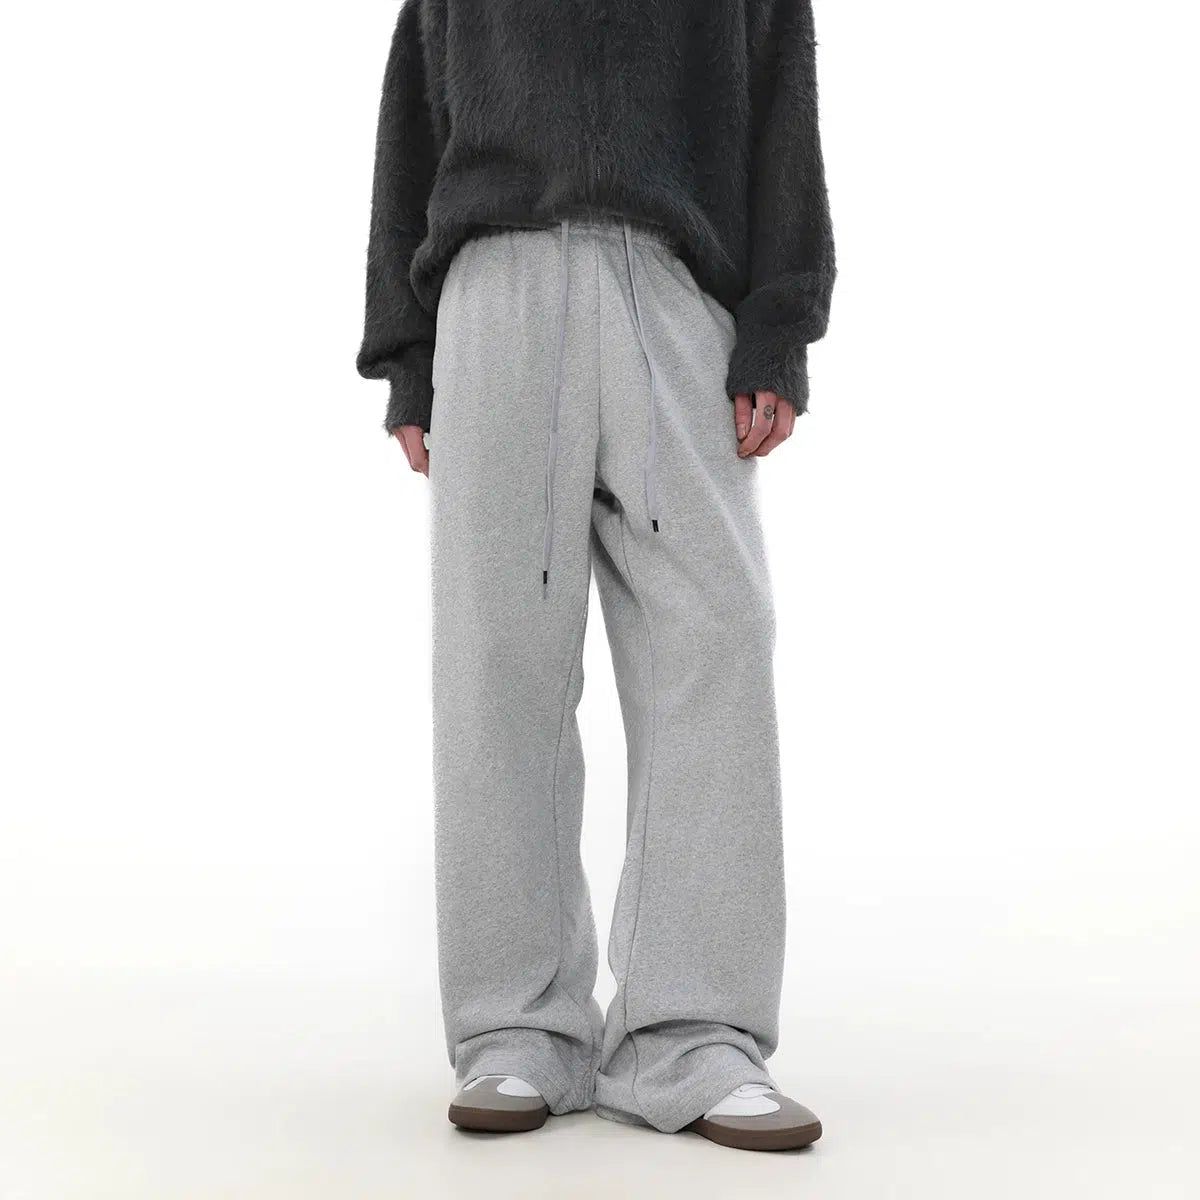 Drawstring Gartered Sweatpants Korean Street Fashion Pants By Mr Nearly Shop Online at OH Vault